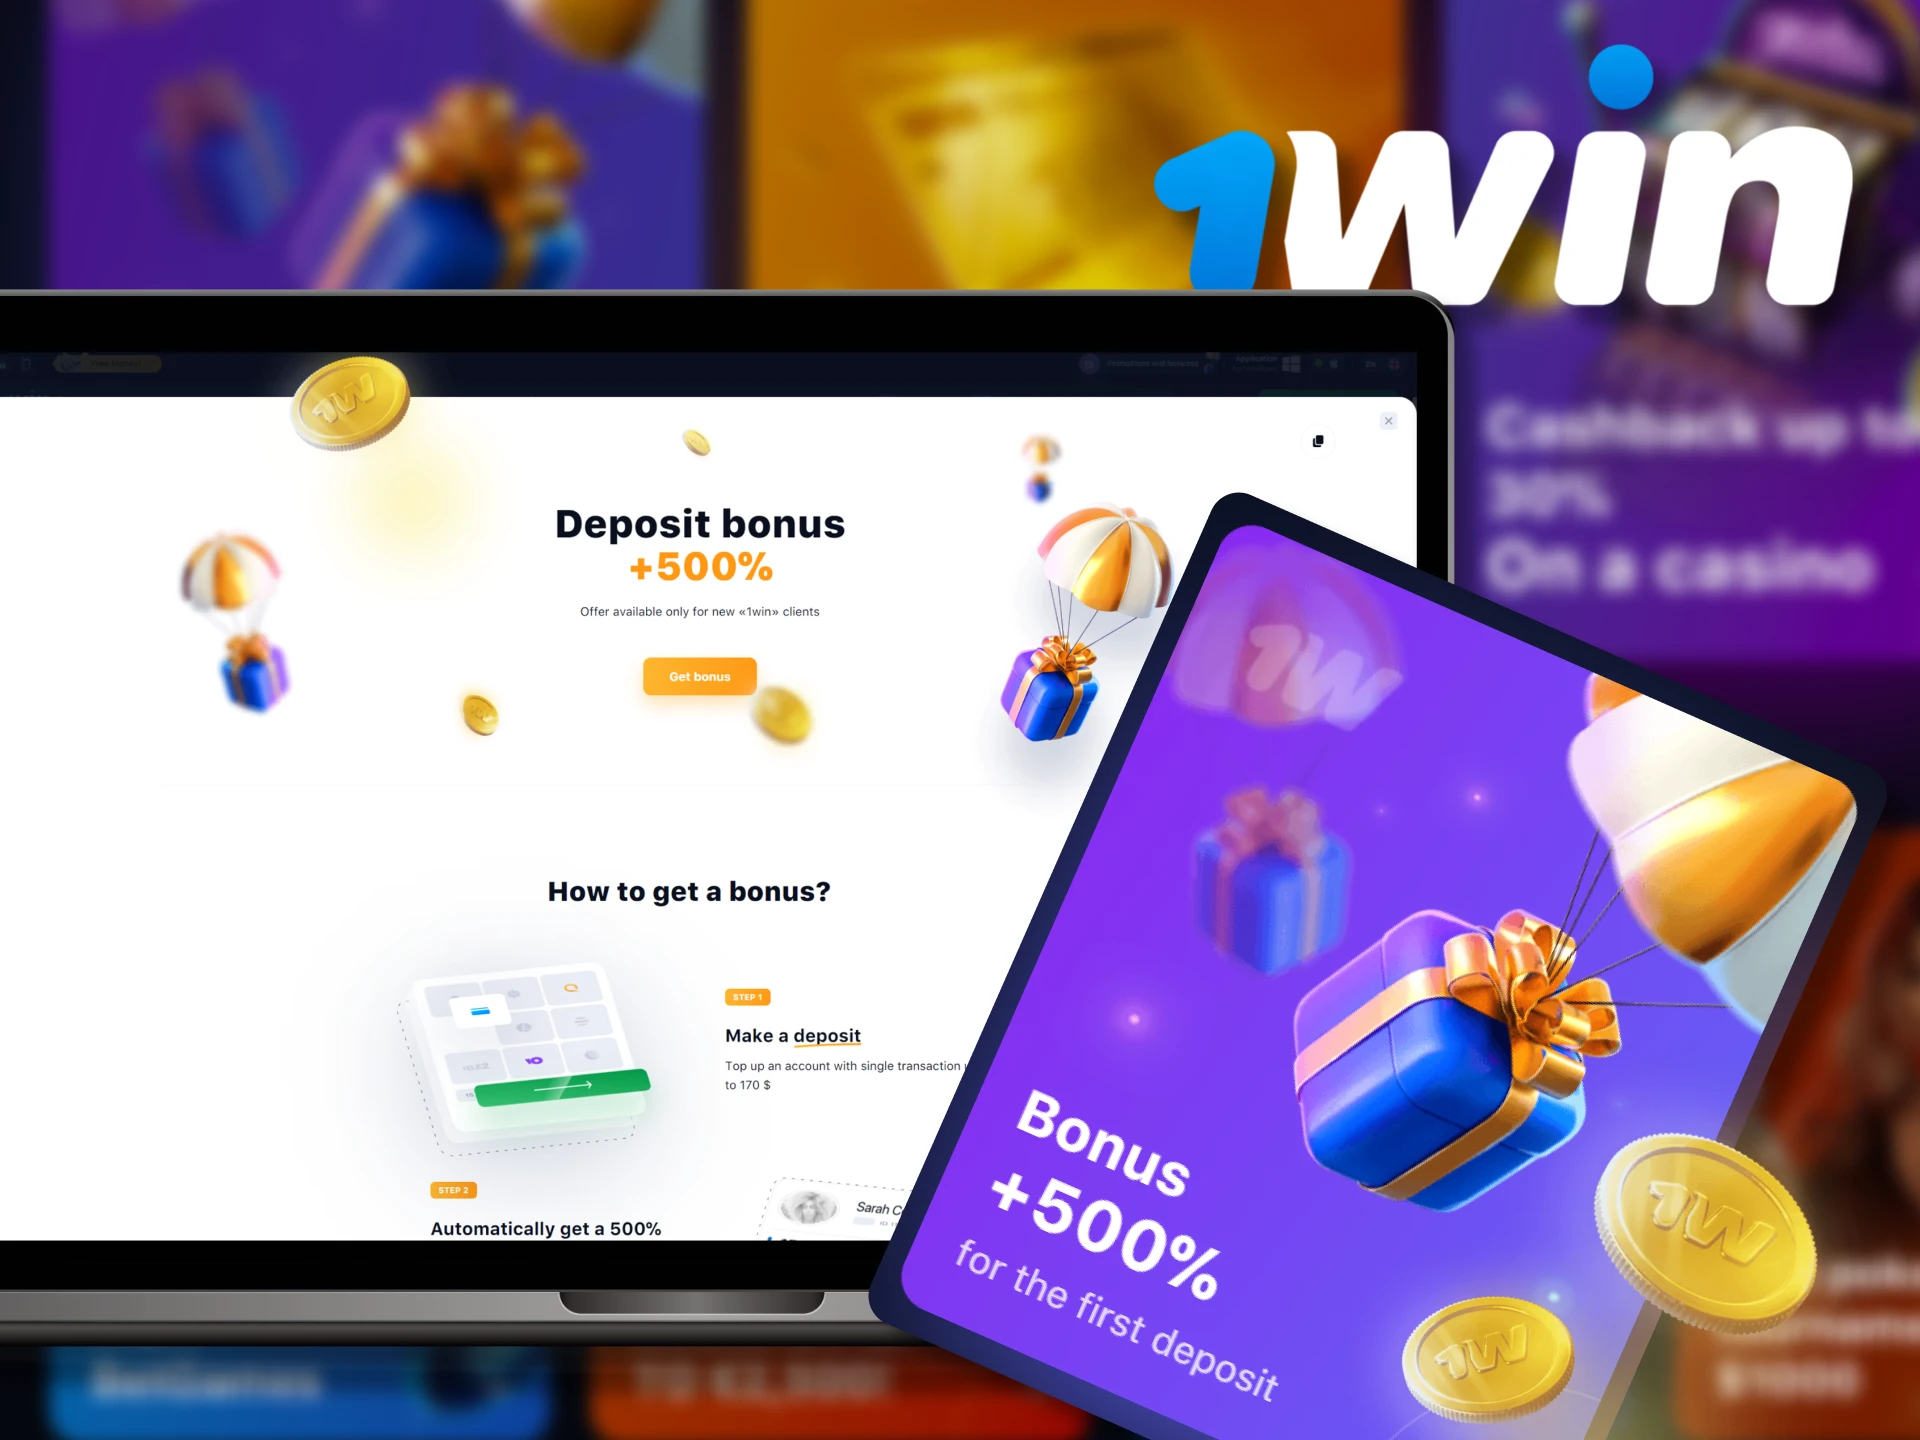 Get the 1win bonus of 500% on your four first deposits.